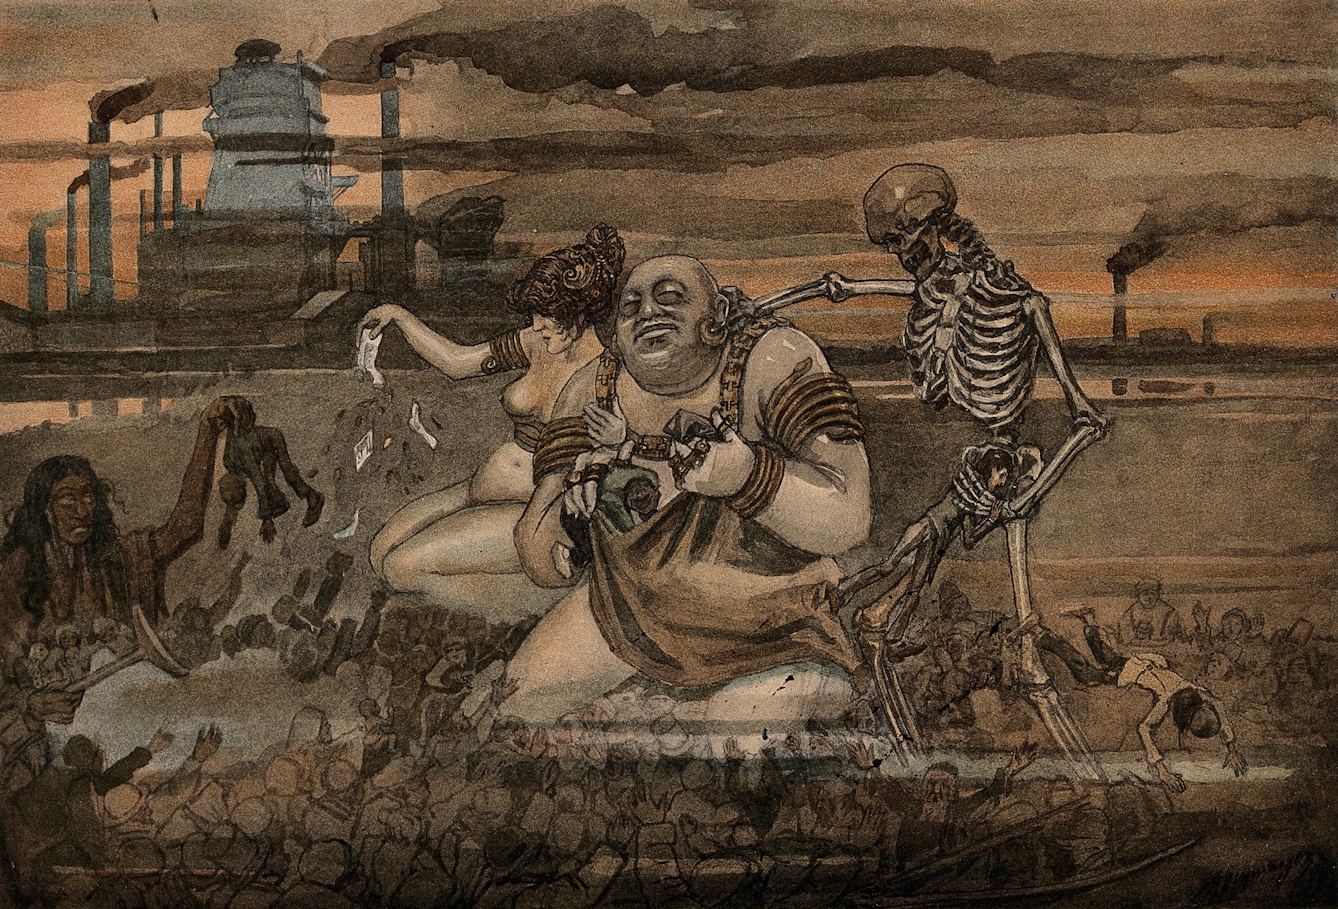 A man and woman, semi-nude but bedecked with jewellery, accompanied by a skeletal representation of Death, are kneeling on a representation of the poor: in the background are factories with smoking chimneys.